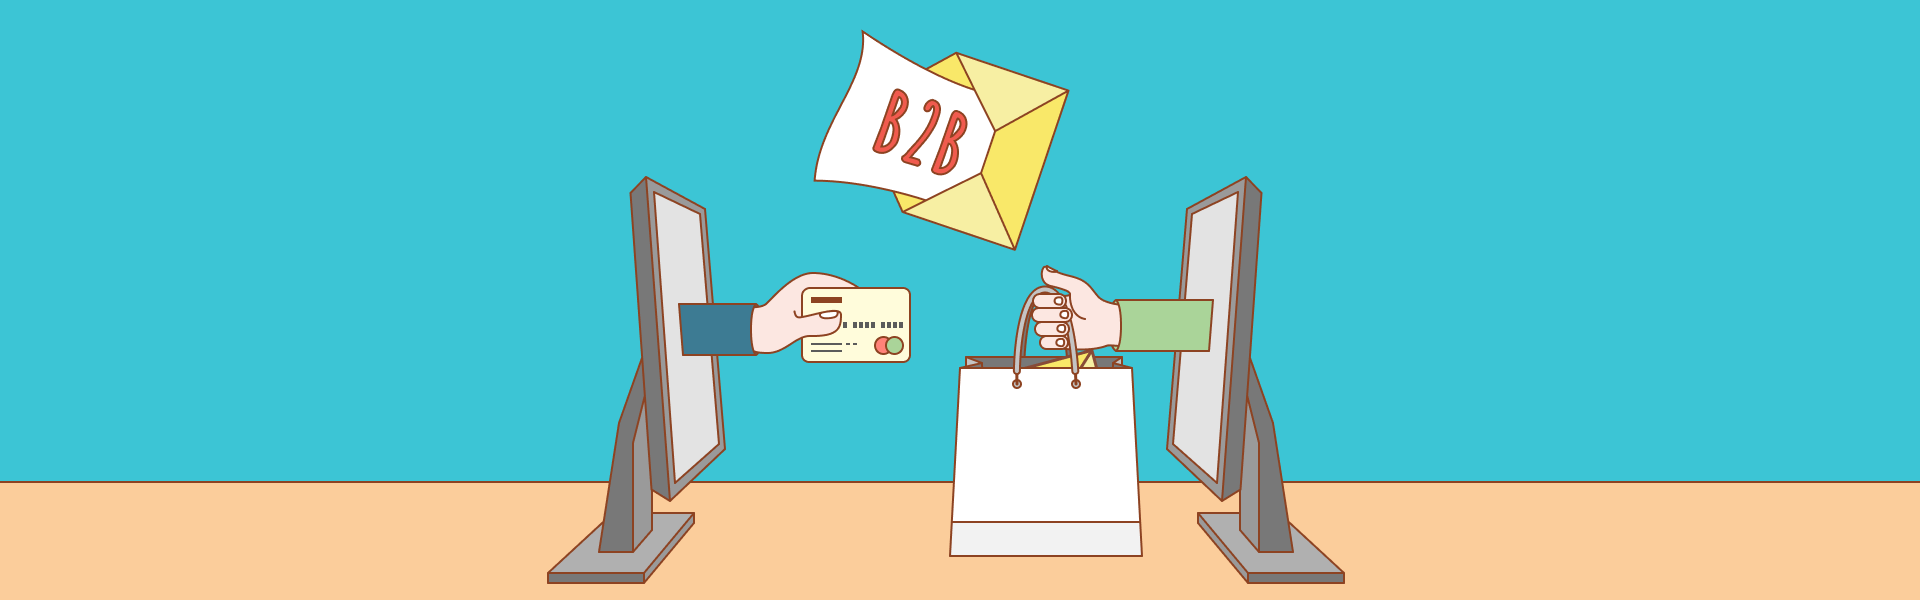 B2B Email Marketing Best Practices to Blow Up Your Sales